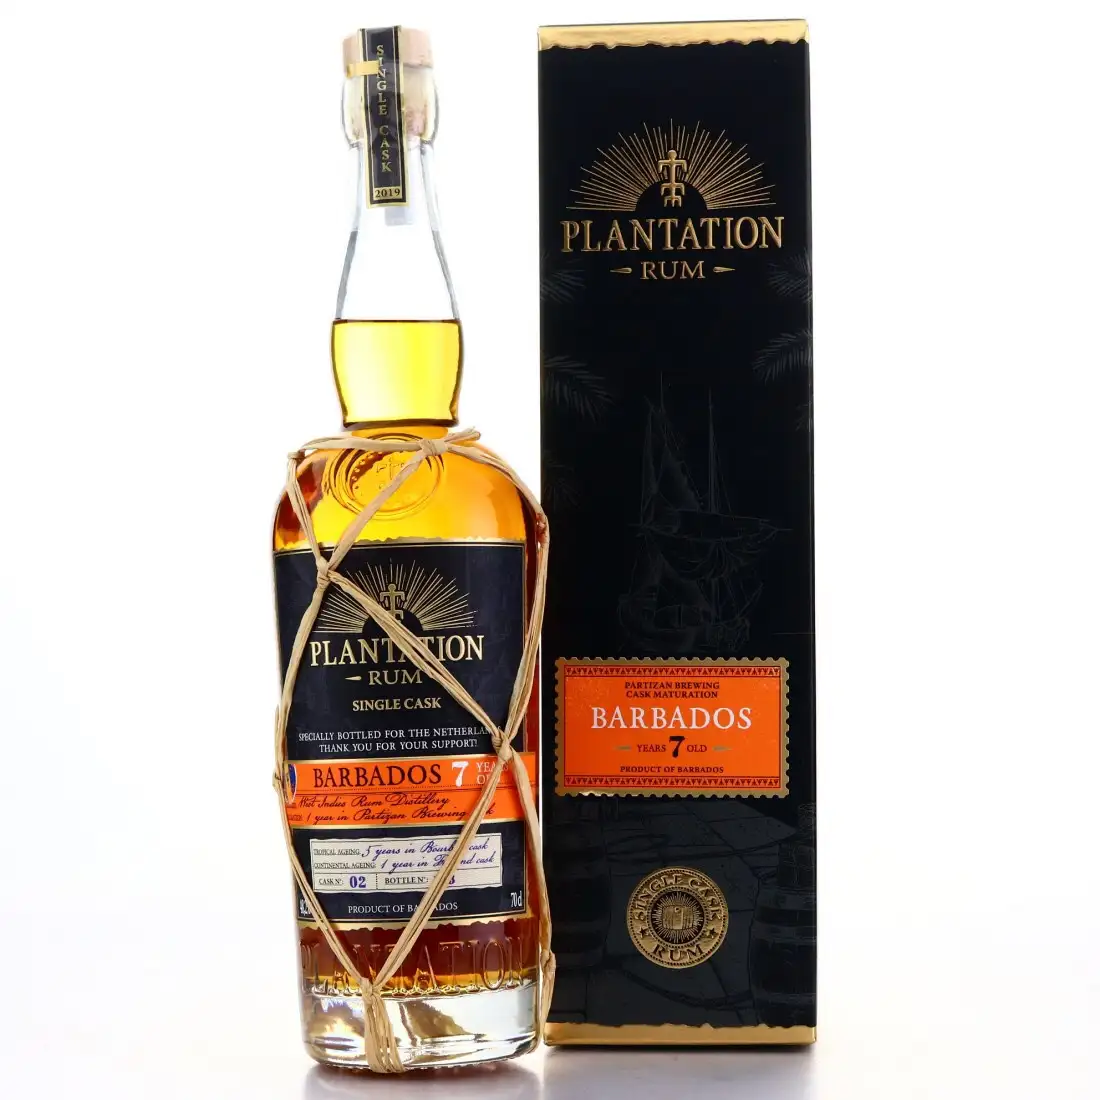 Image of the front of the bottle of the rum Plantation Single Cask (Partizan Brewing Cask Finish)